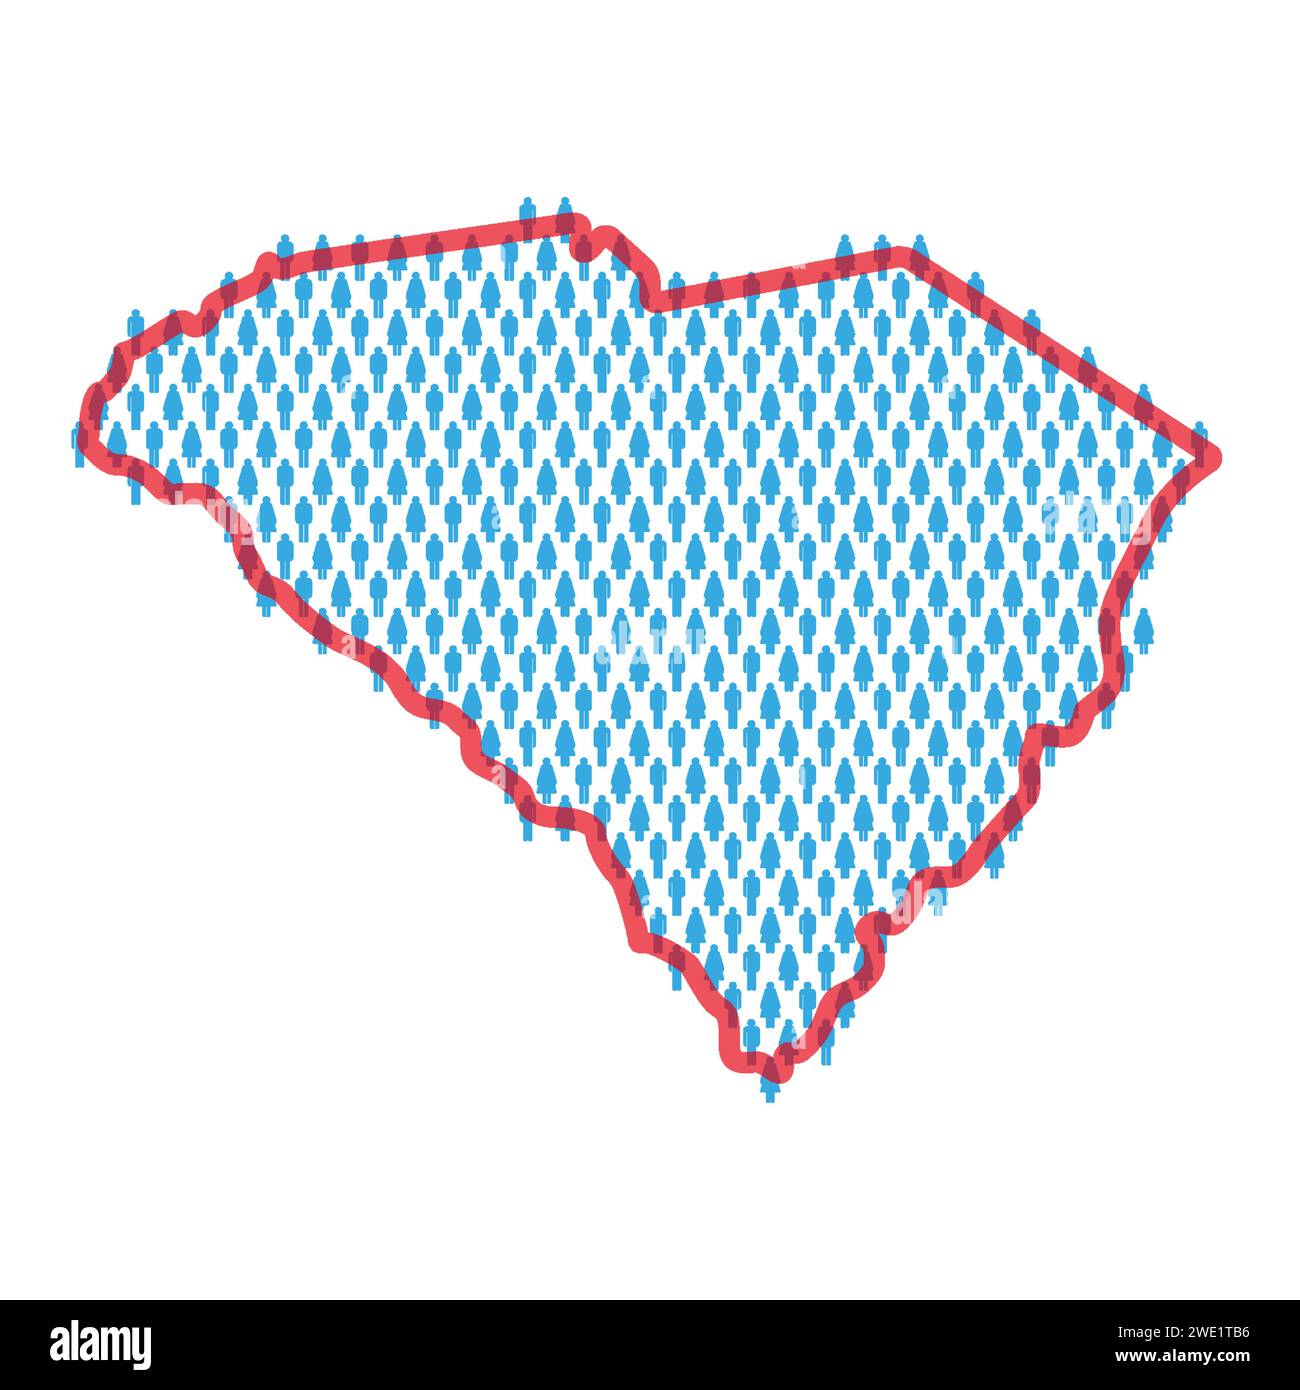 South Carolina population map. Stick figures people map with bold red translucent state border. Pattern of men and women icons. Isolated vector illust Stock Vector